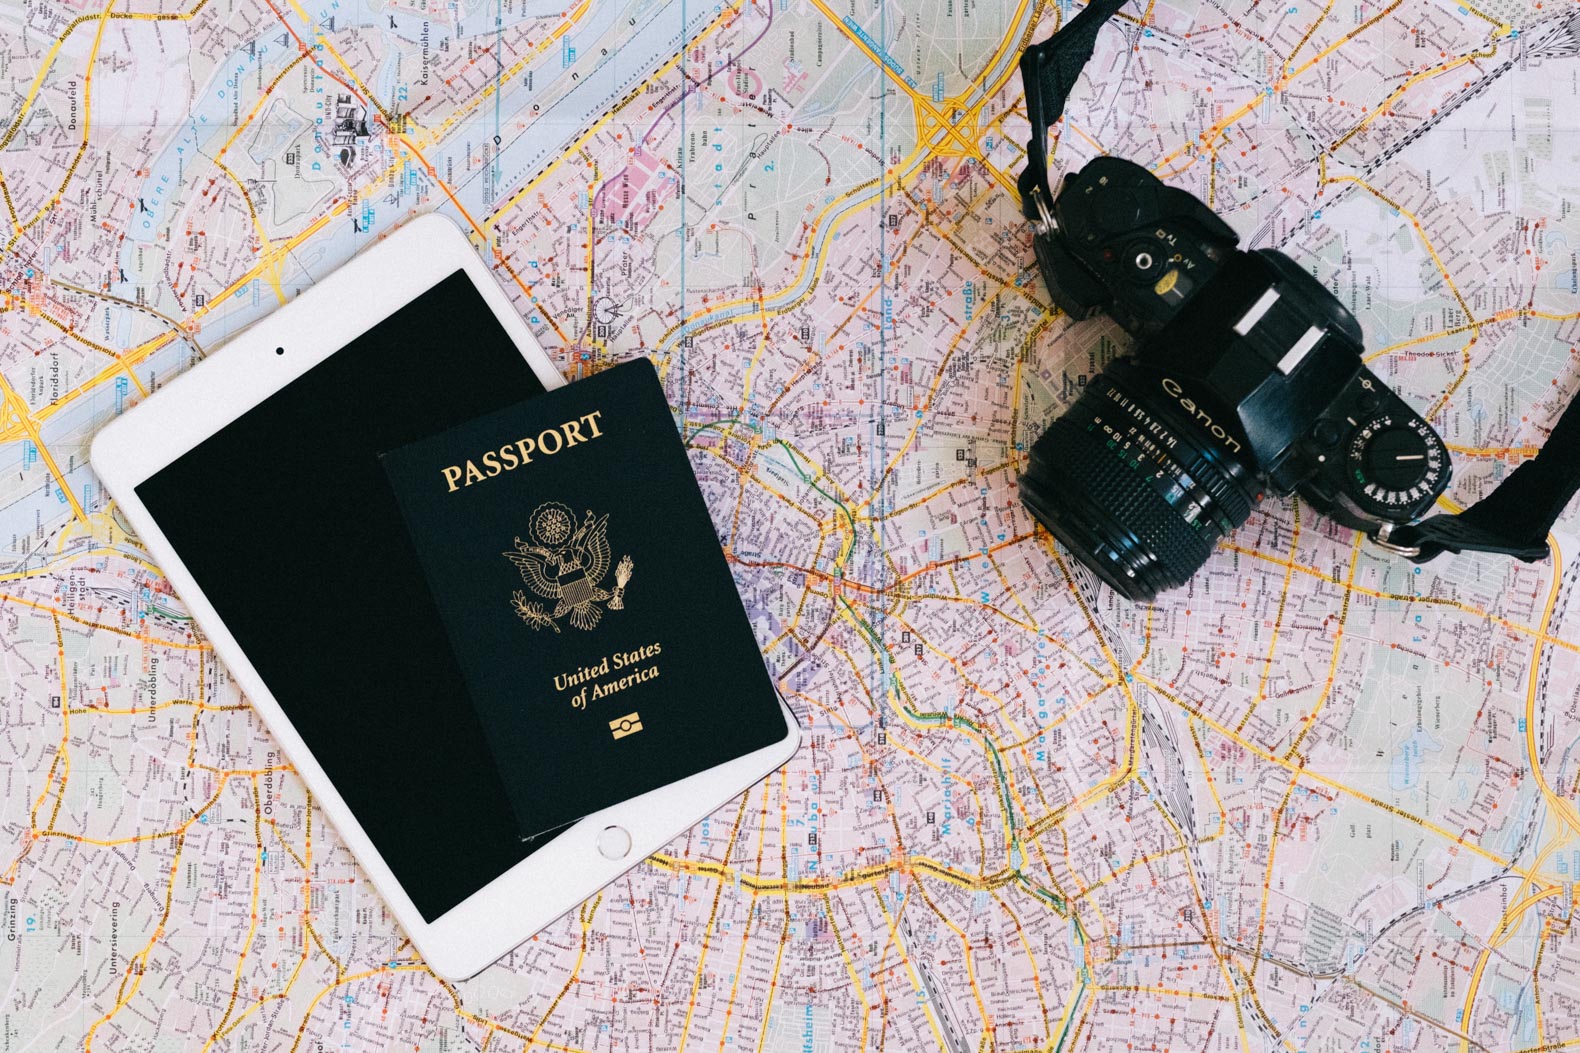 Passport, film camera, and an ipad on a map